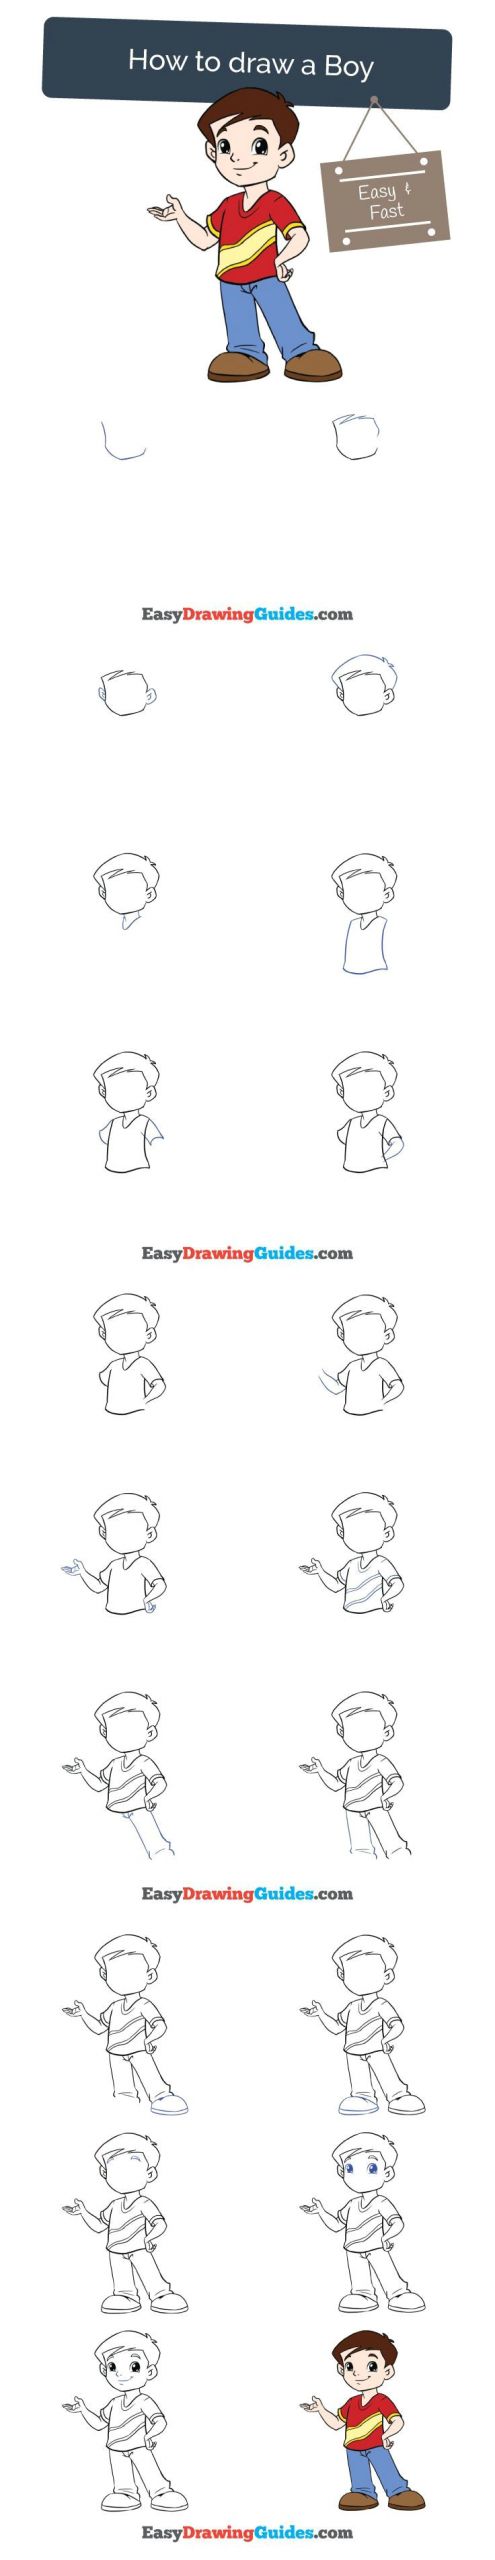 Easy Drawings Of Boys How to Draw A Boy Drawing Tutorials for Kids Easy